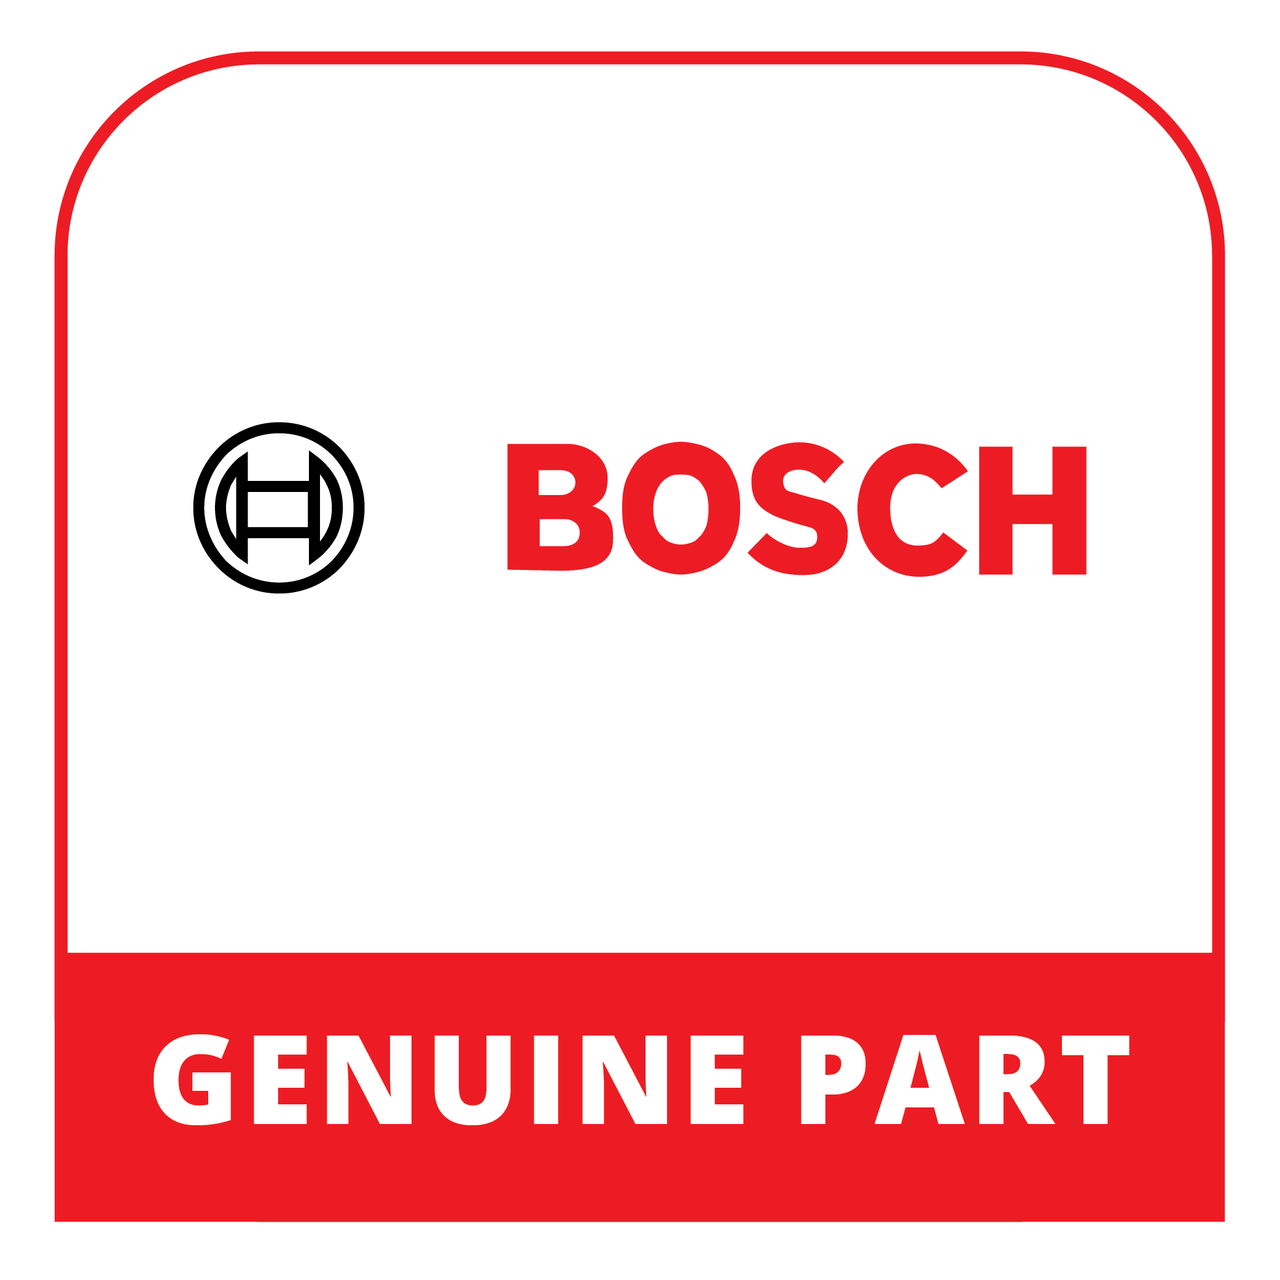 Bosch (Thermador) 20000753 - Frame - Genuine Bosch (Thermador) Part